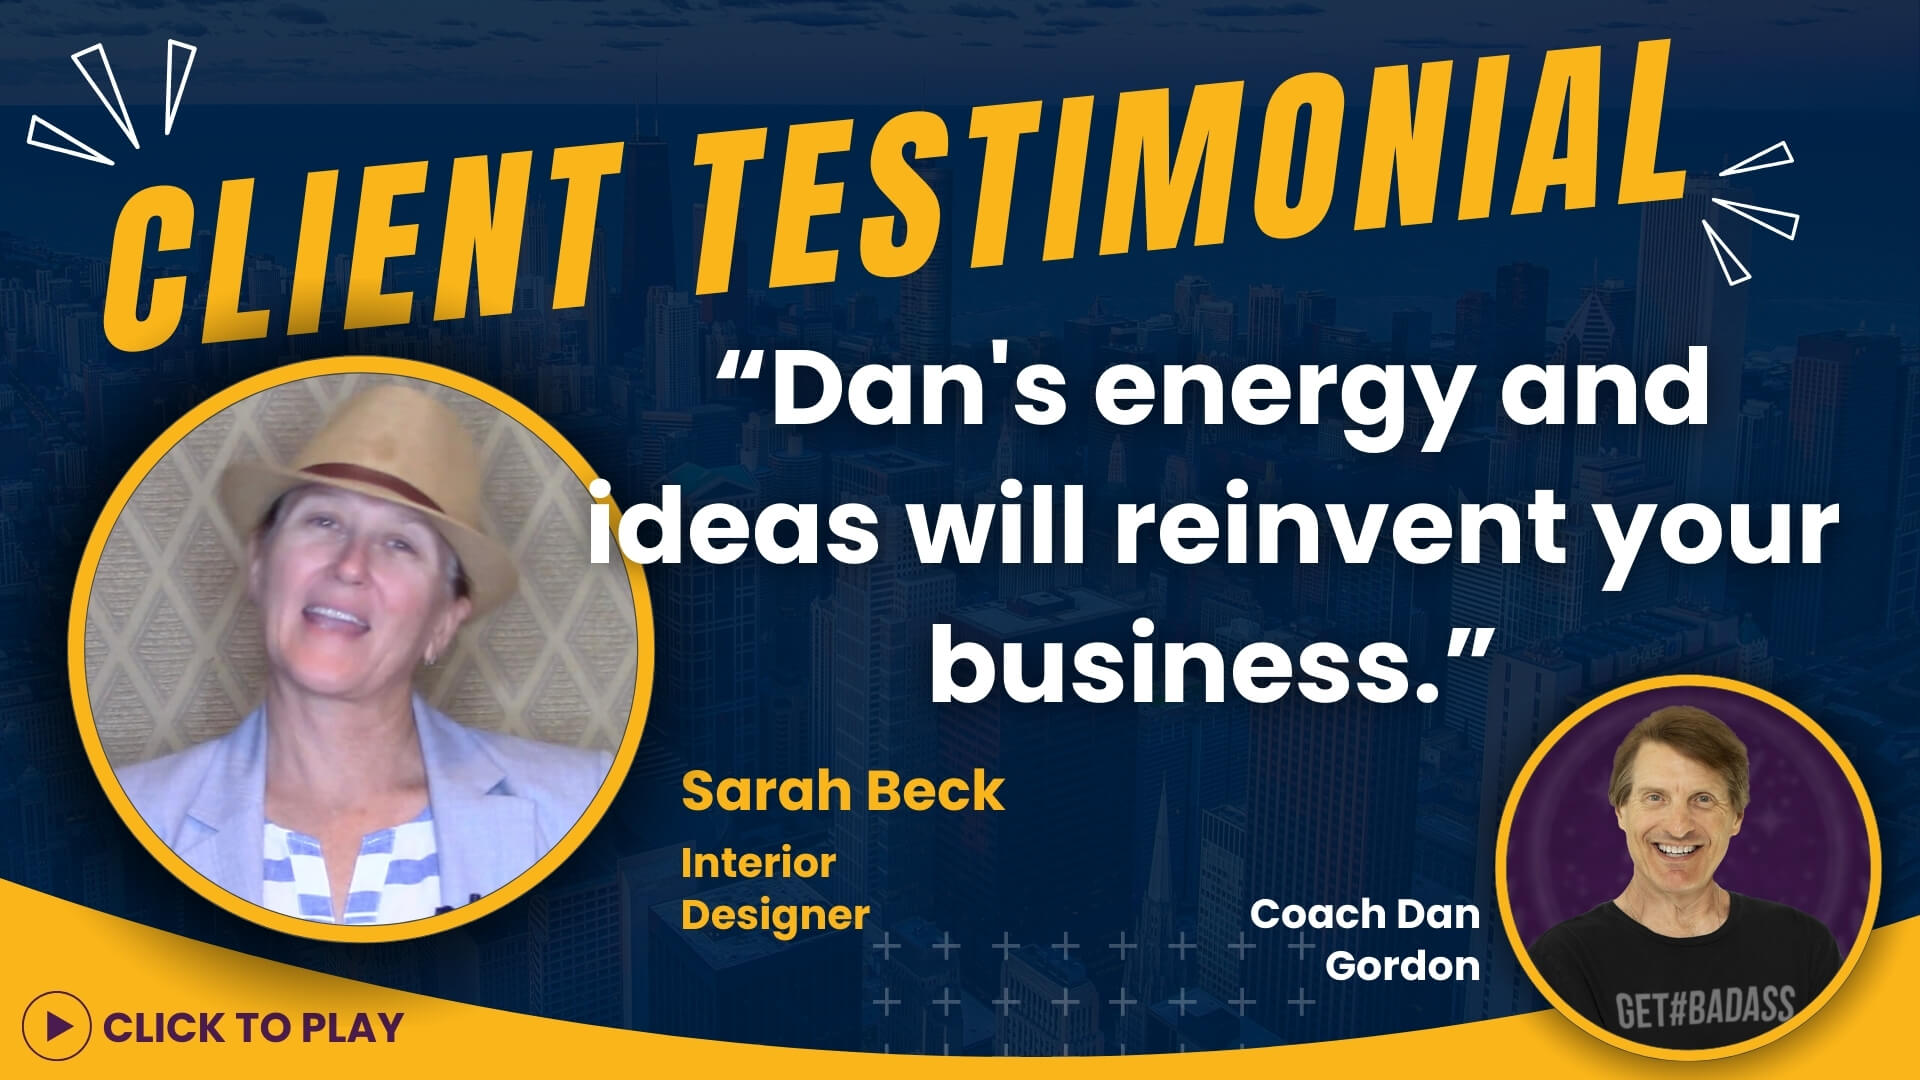 Sarah Beck, an interior designer, donning a straw hat, shares a glowing testimonial about Coach Dan Gordon's energizing business ideas against a cityscape backdrop.